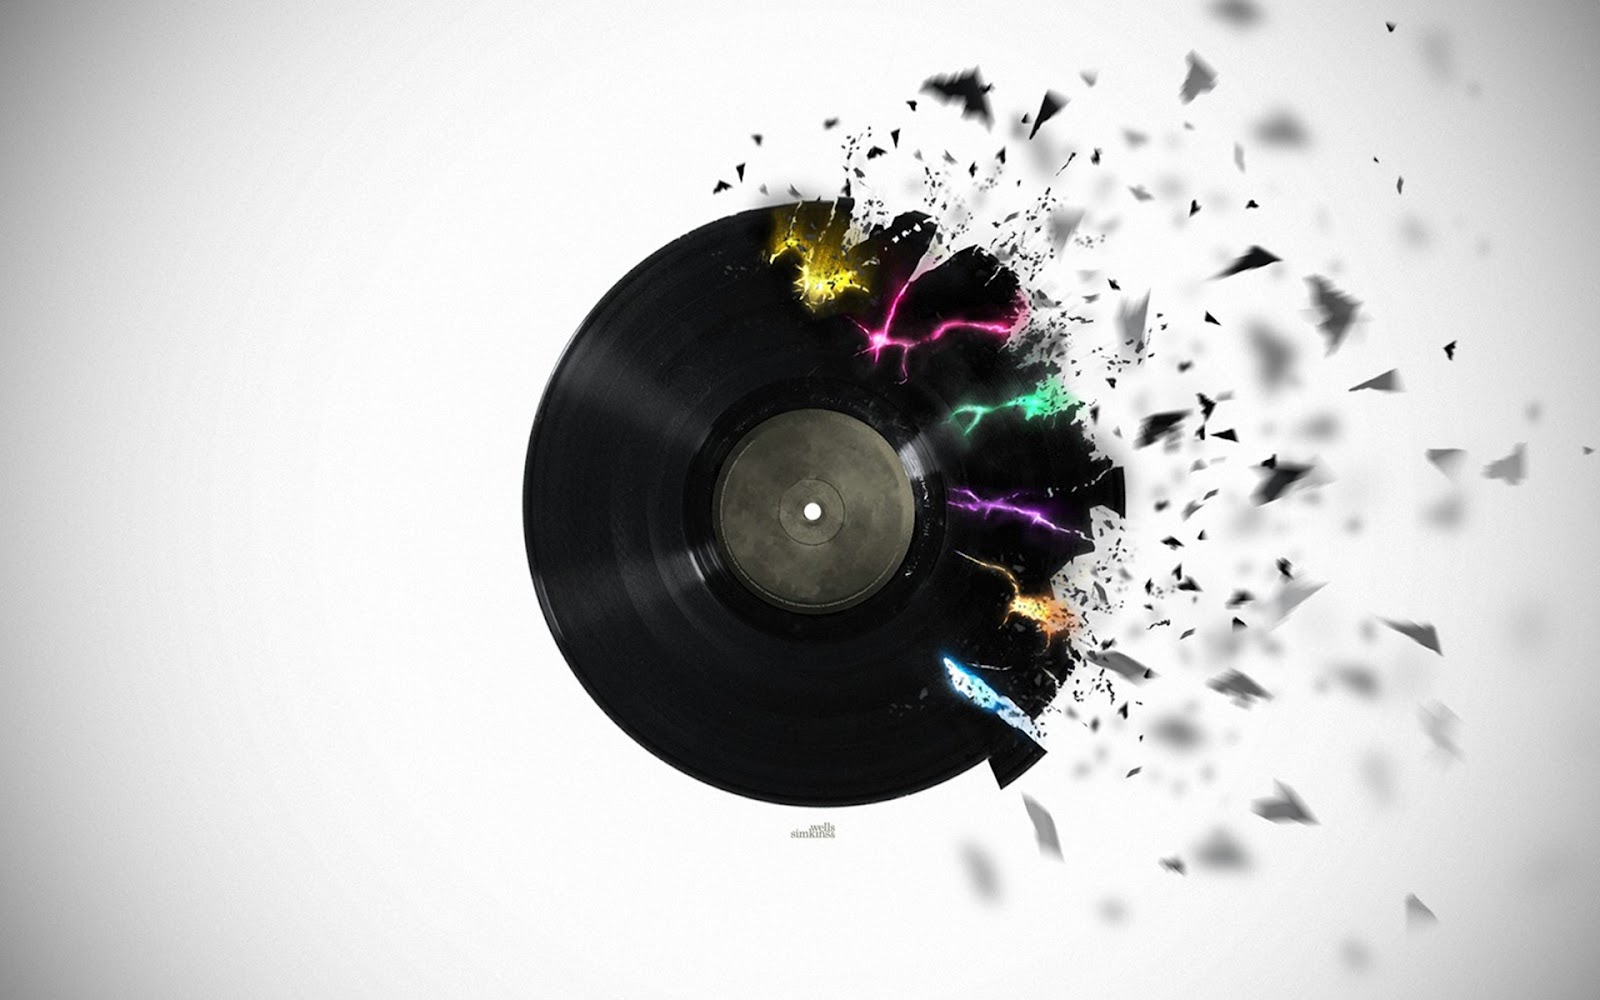 More Dj Music Wallpaper Post From Pixhome HD